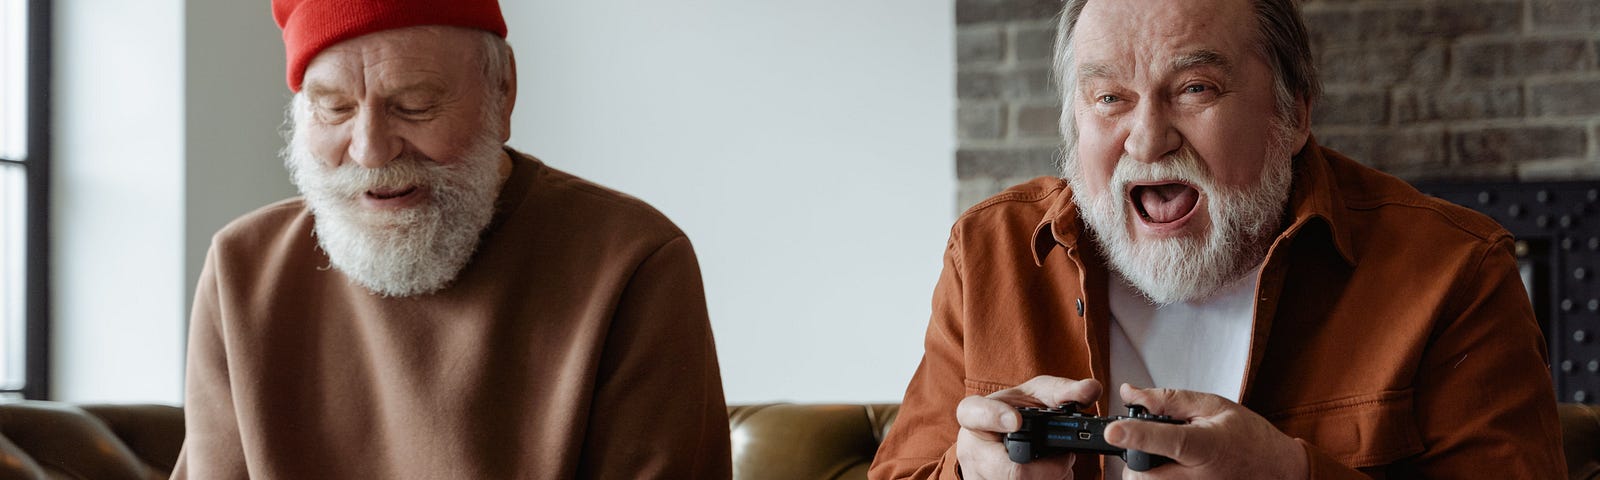 Two bearded older men in brown shirts play a video game